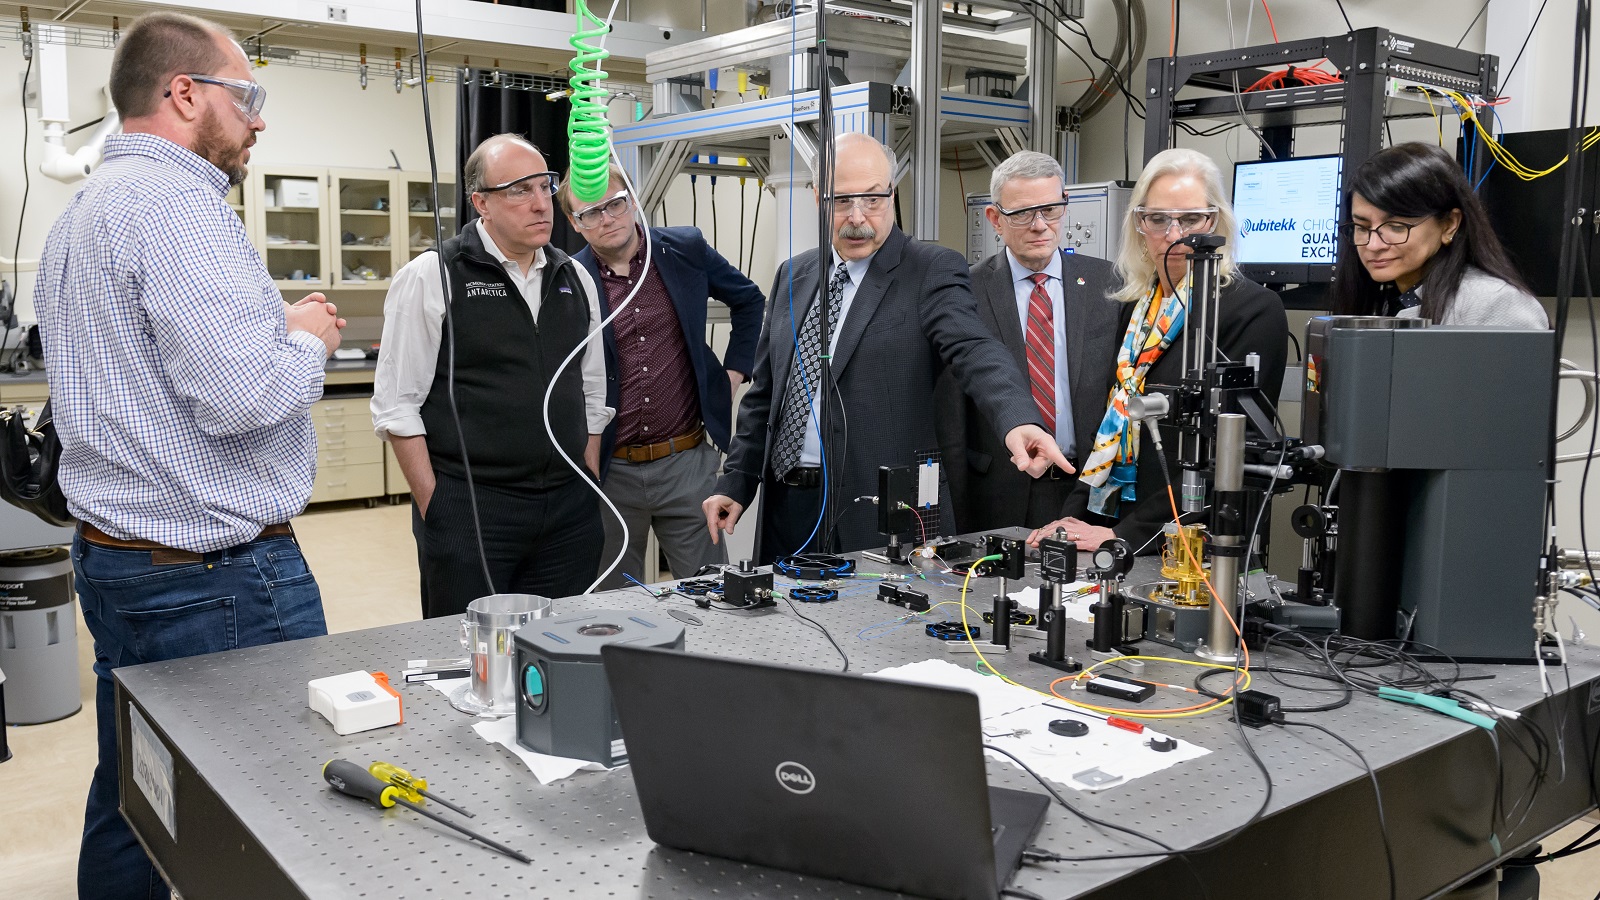 Department of Energy Under Secretary for Science Paul Dabbar and Argonne and UChicago scientists and leaders discuss quantum entanglement along Argonne’s quantum loop, a 52-mile fiber optic test bed for quantum communication in the Chicago suburbs. (Image by Argonne National Laboratory.)